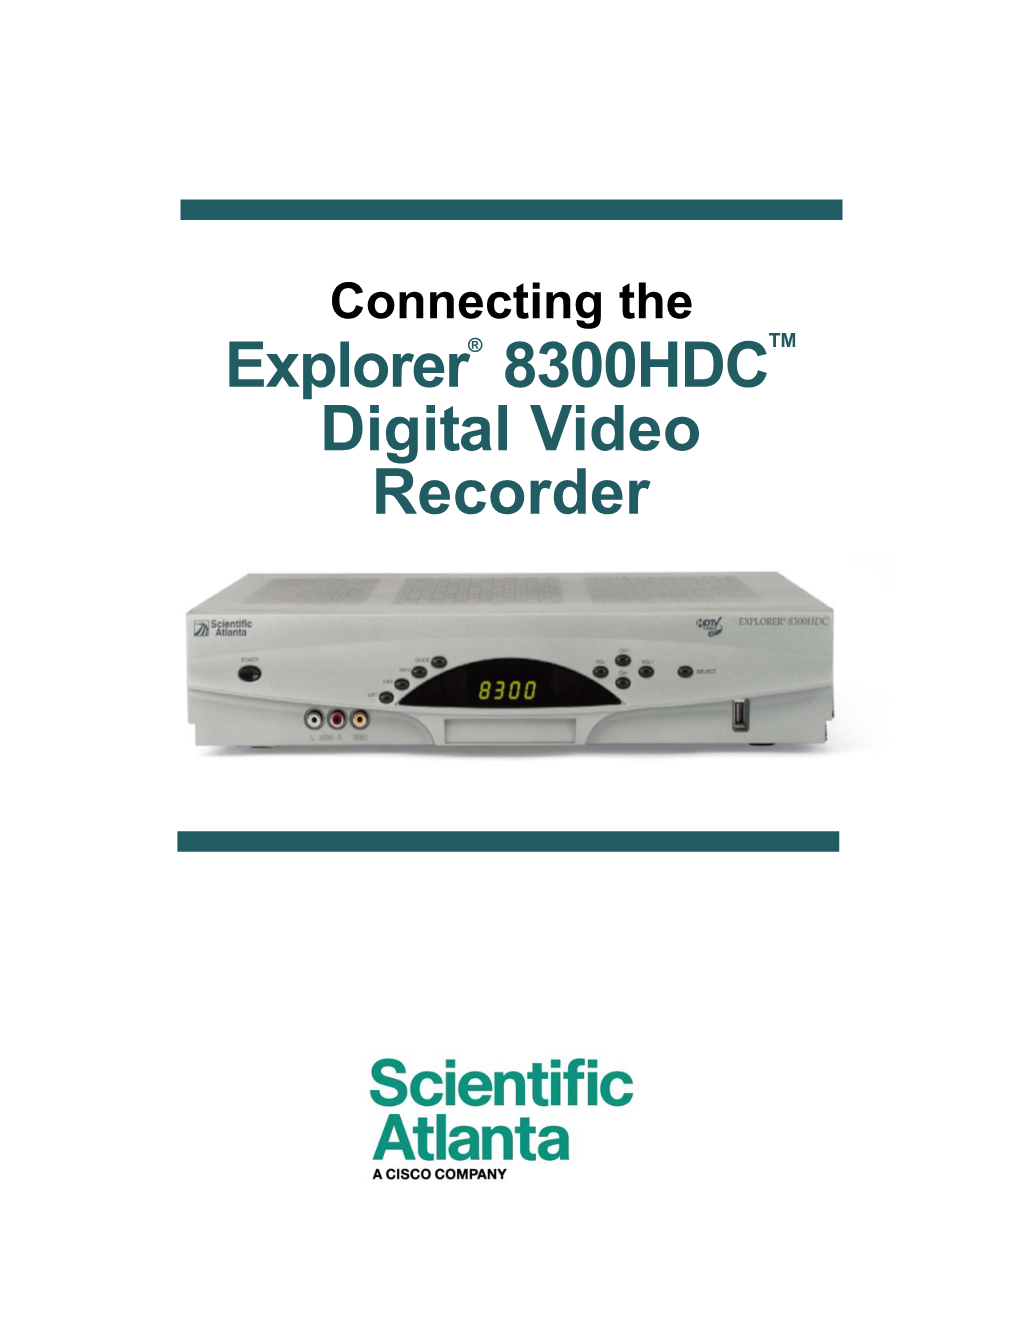 Connecting the Explorer 8300HDC Digital Video Recorder